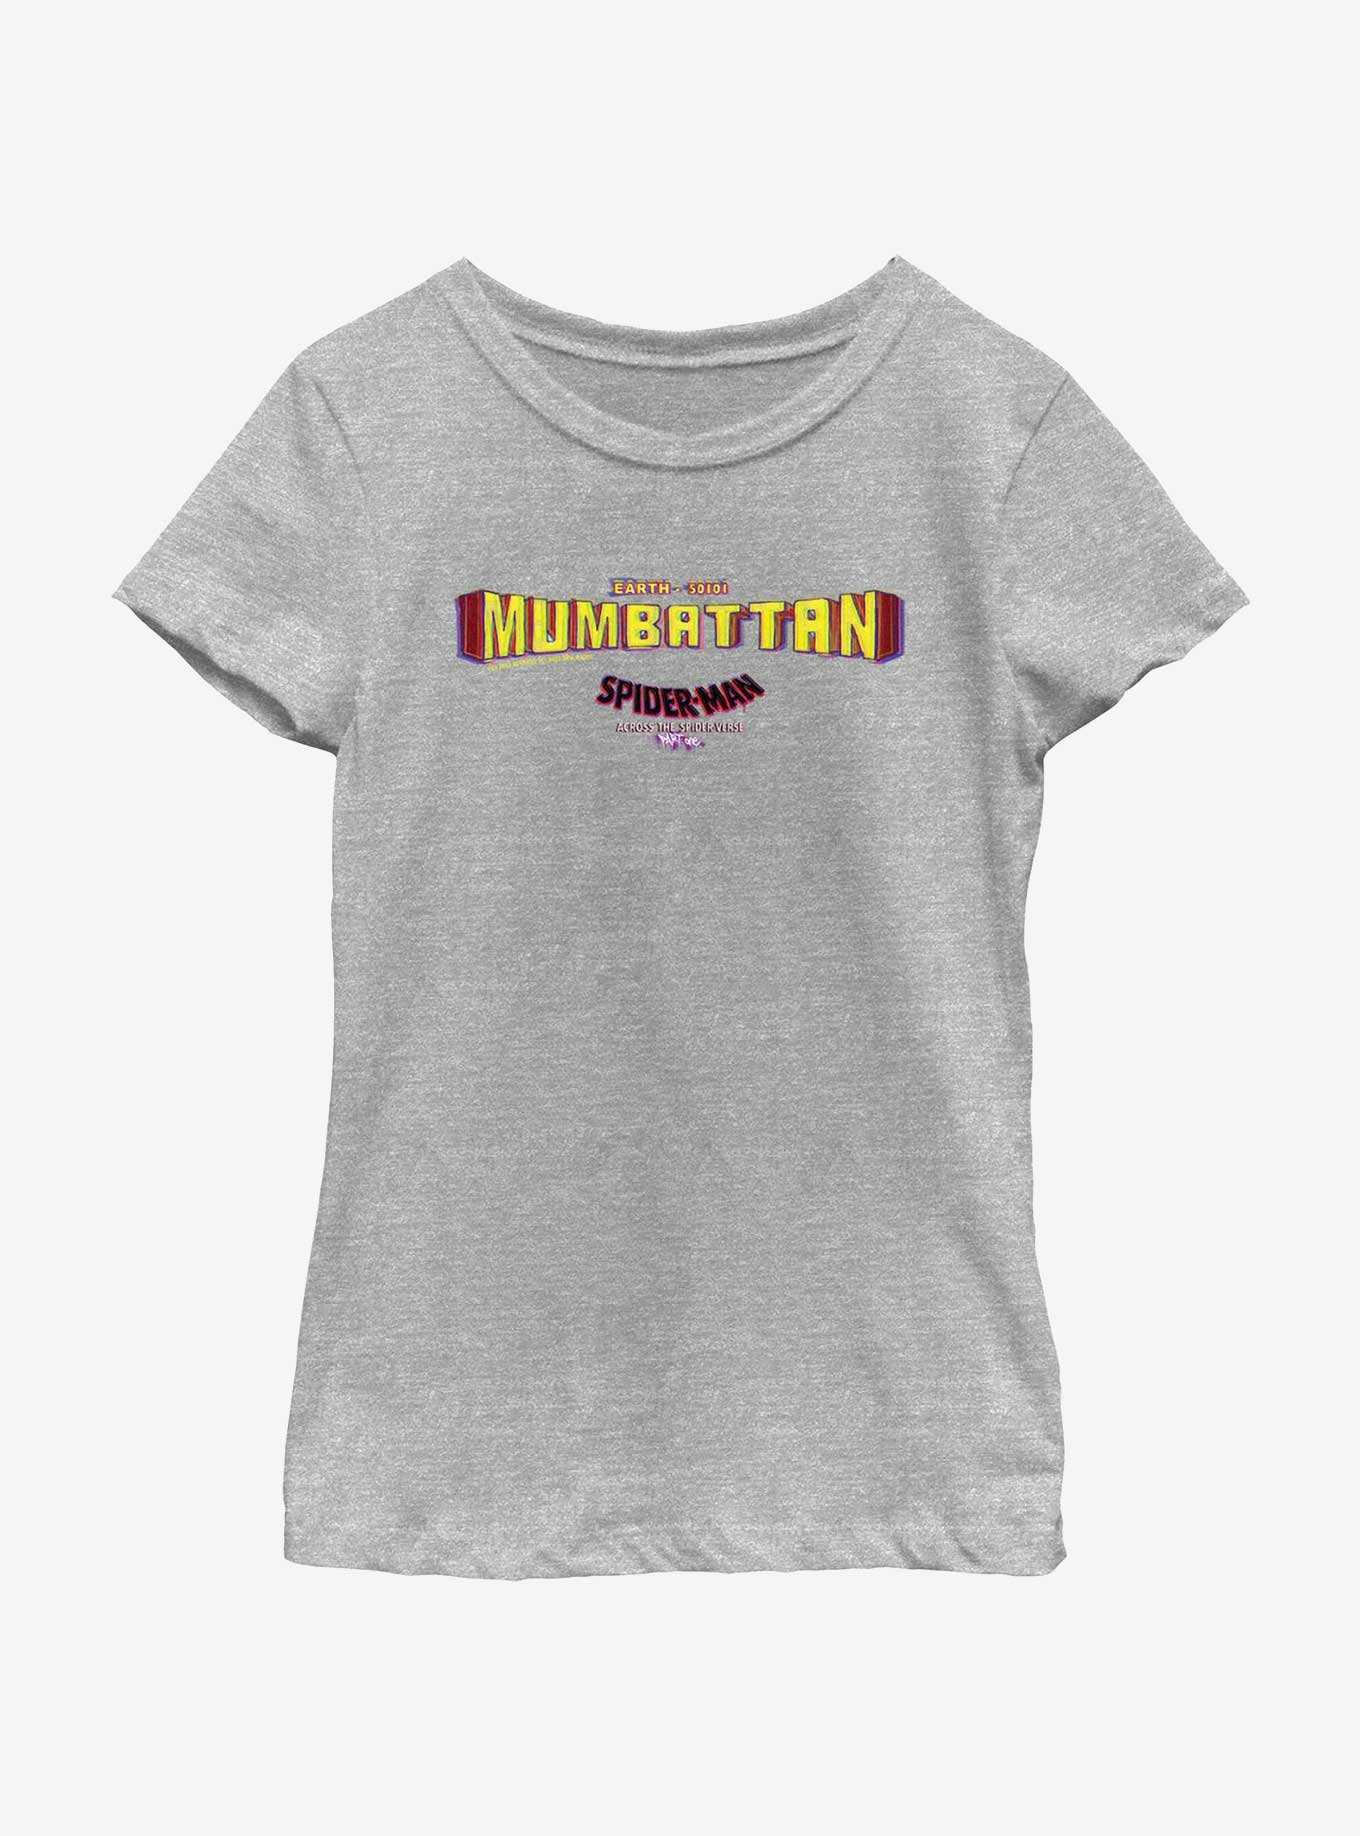 Marvel Spider-Man: Across The Spider-Verse Mumbattan Earth-50101 Youth Girls T-Shirt, , hi-res